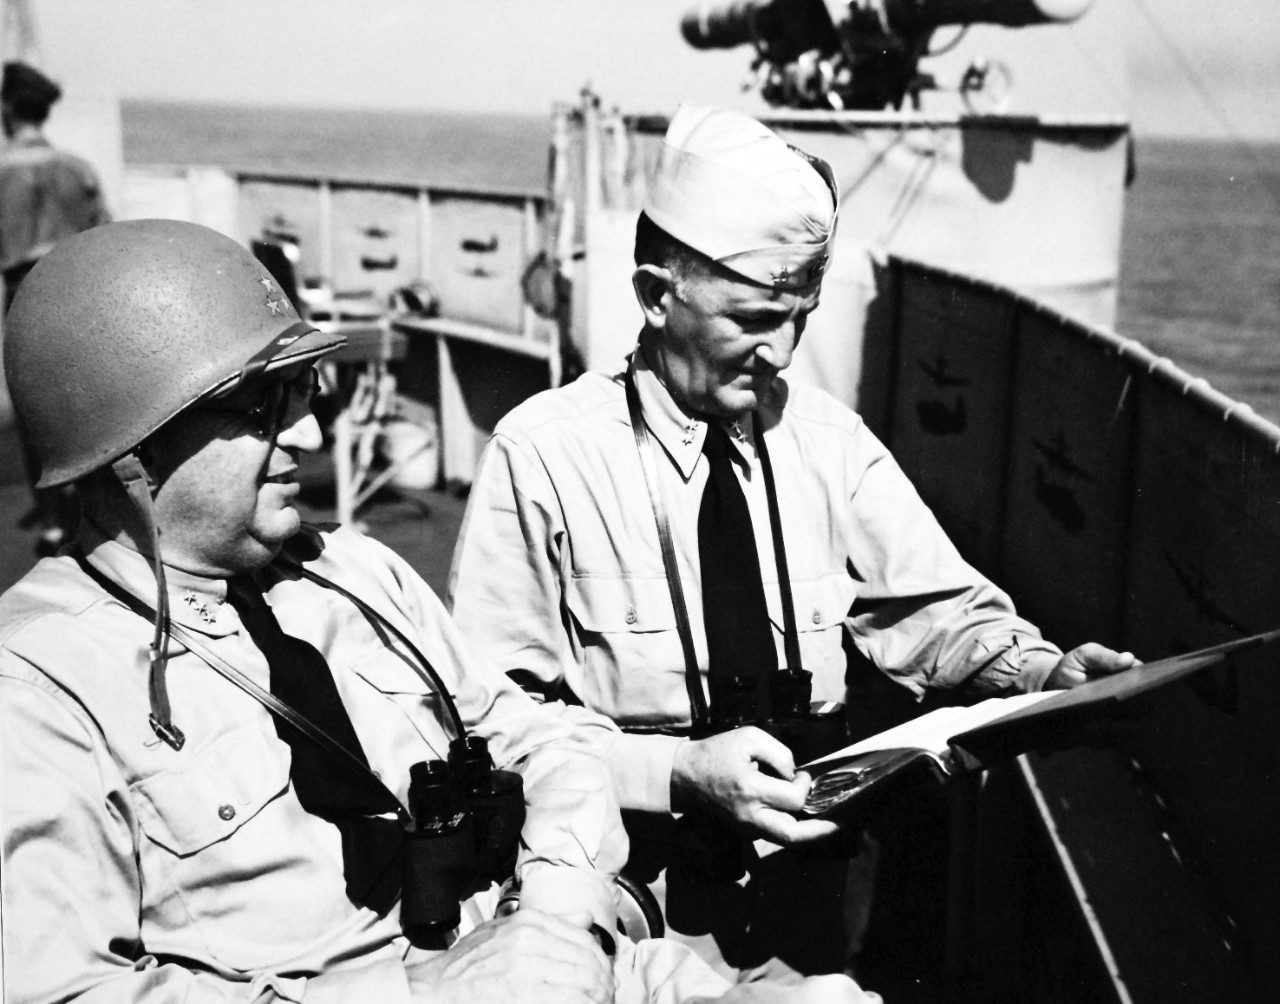 80-G-87316:  Operation Avalanche, September 1943.  Admiral H.K. Hewitt, USN, and Rear Admiral S.S. Lewis, USN, in flag bridge of ship, probably USS Ancon (AGC 4) during operations at Salerno, Italy.  Photograph released September 12, 1943.   U.S. Navy photograph, now in the collections of the National Archives.  (2017/04/04).